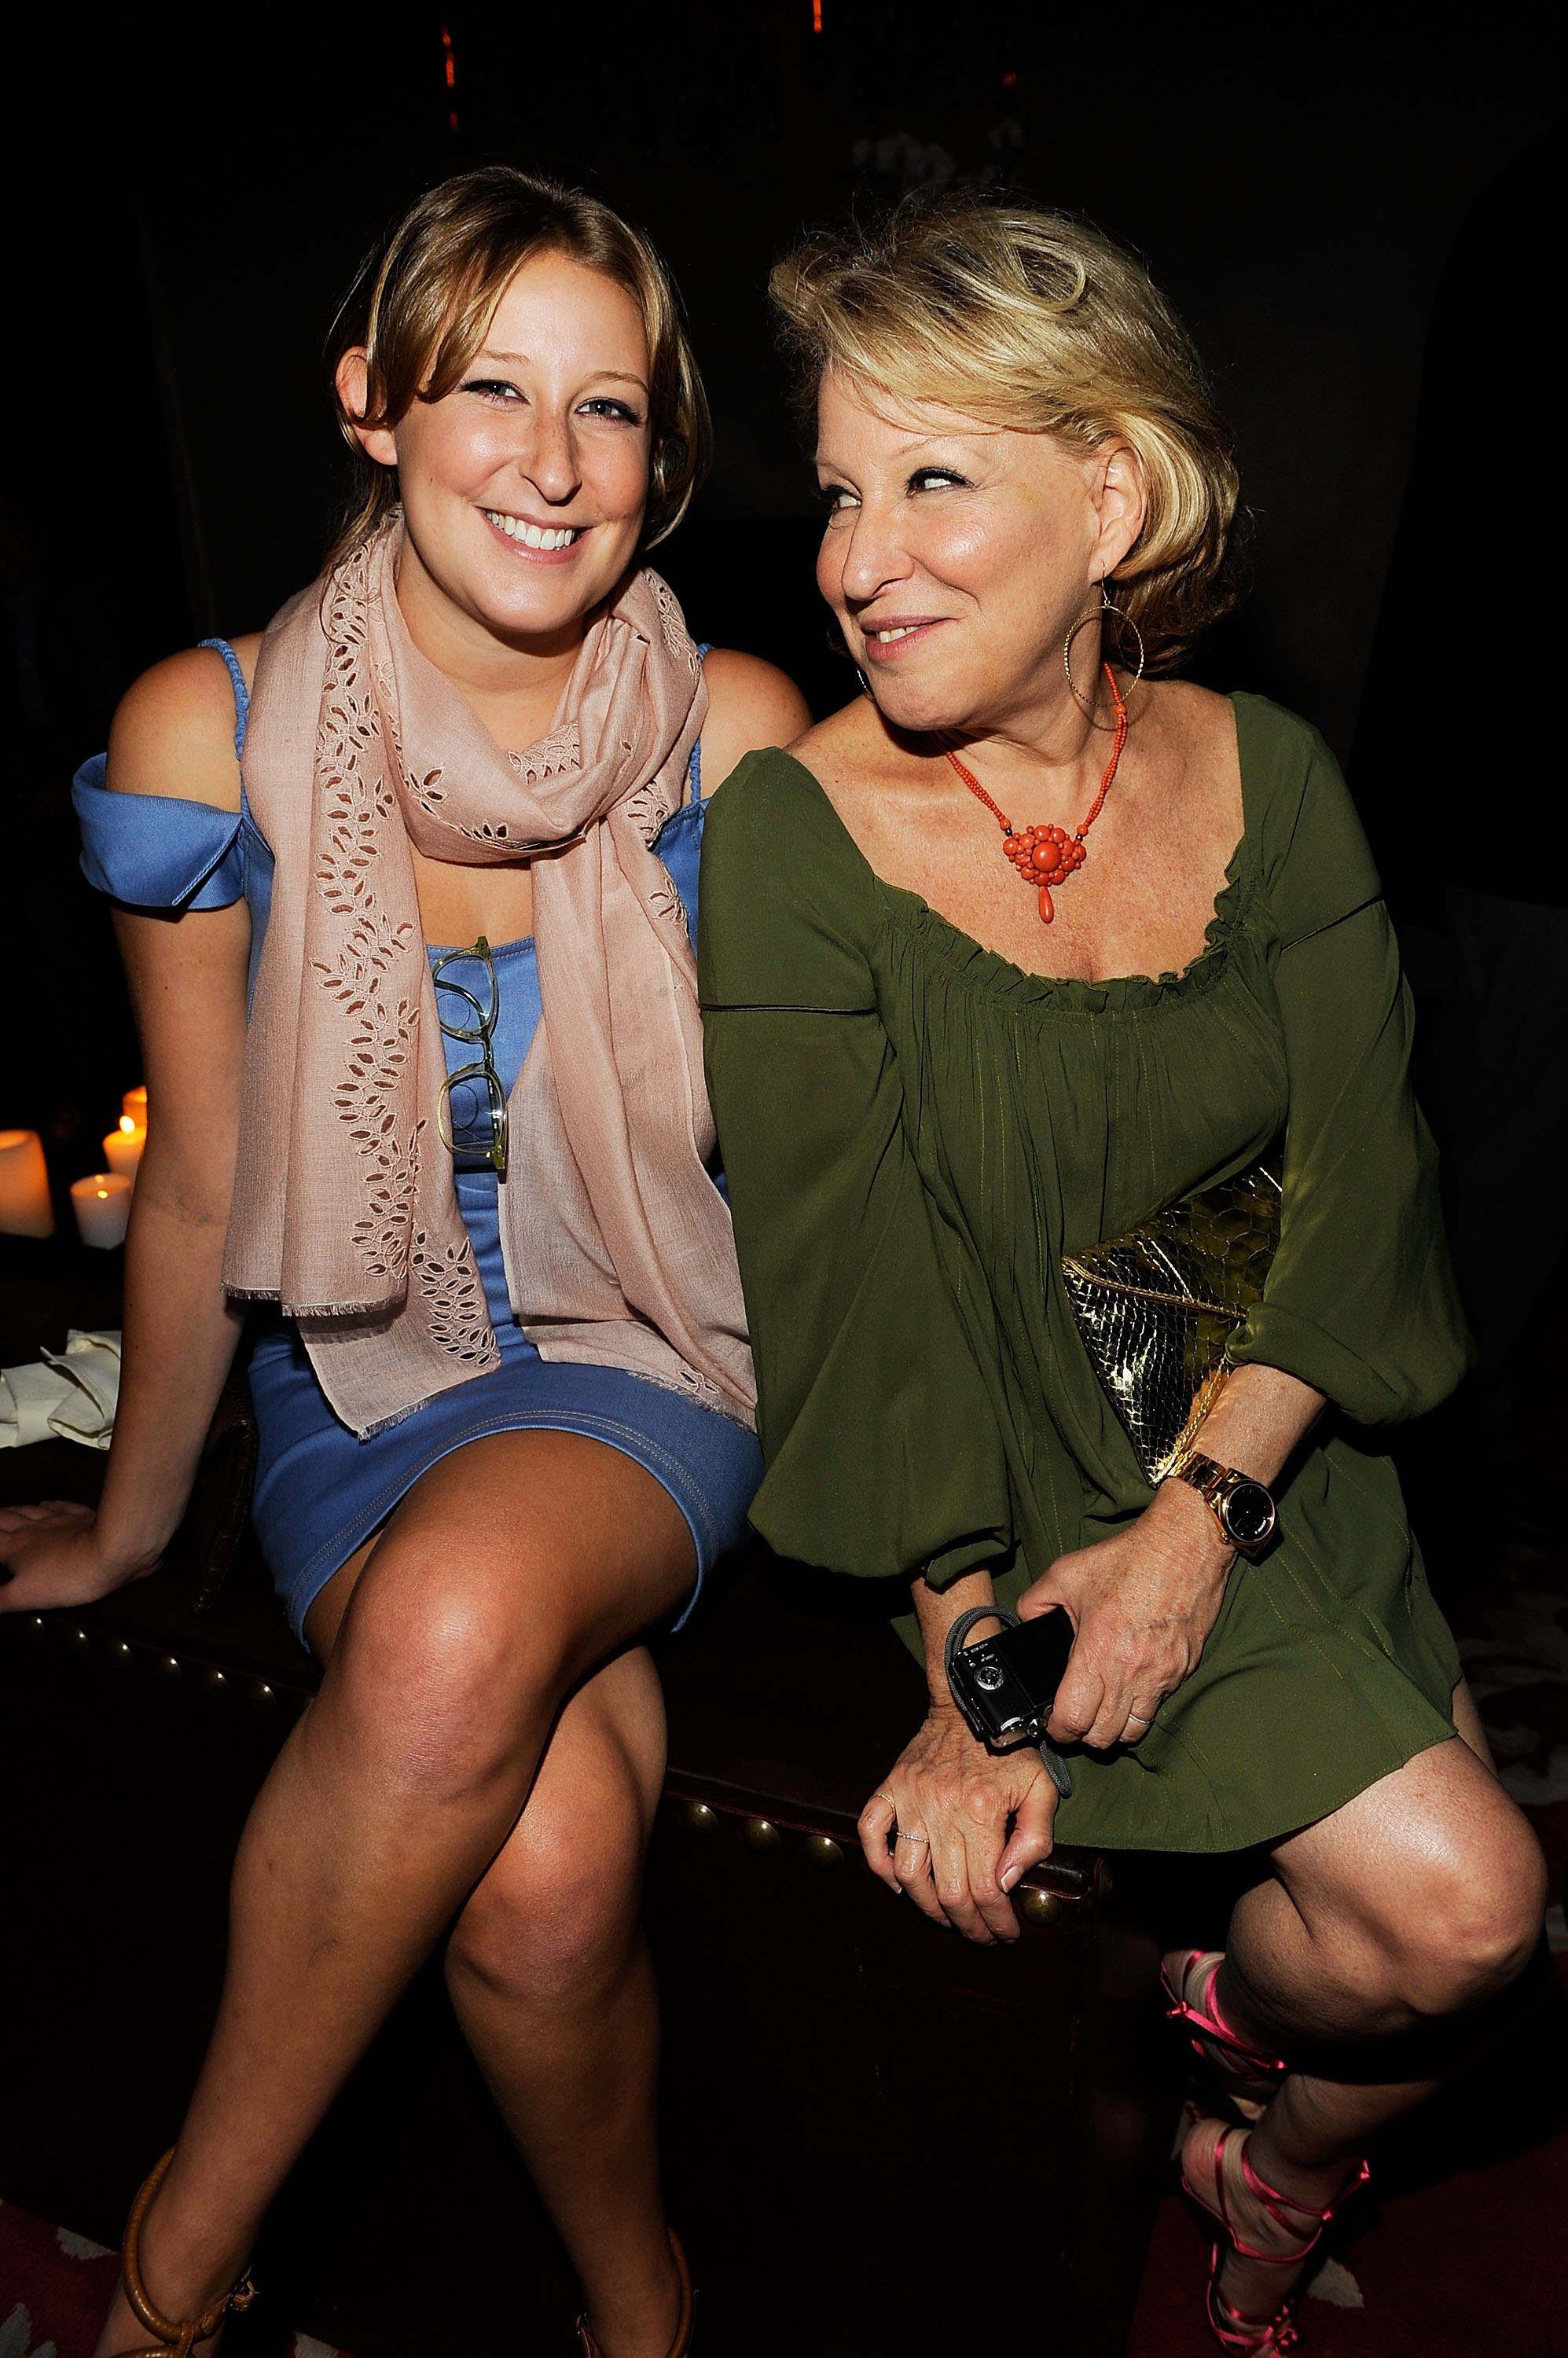 Sophie von Haselberg and Bette Midler at the after party for the Cinema Society Screening of "The Women" in New York City, 2008 | Source: Getty Images